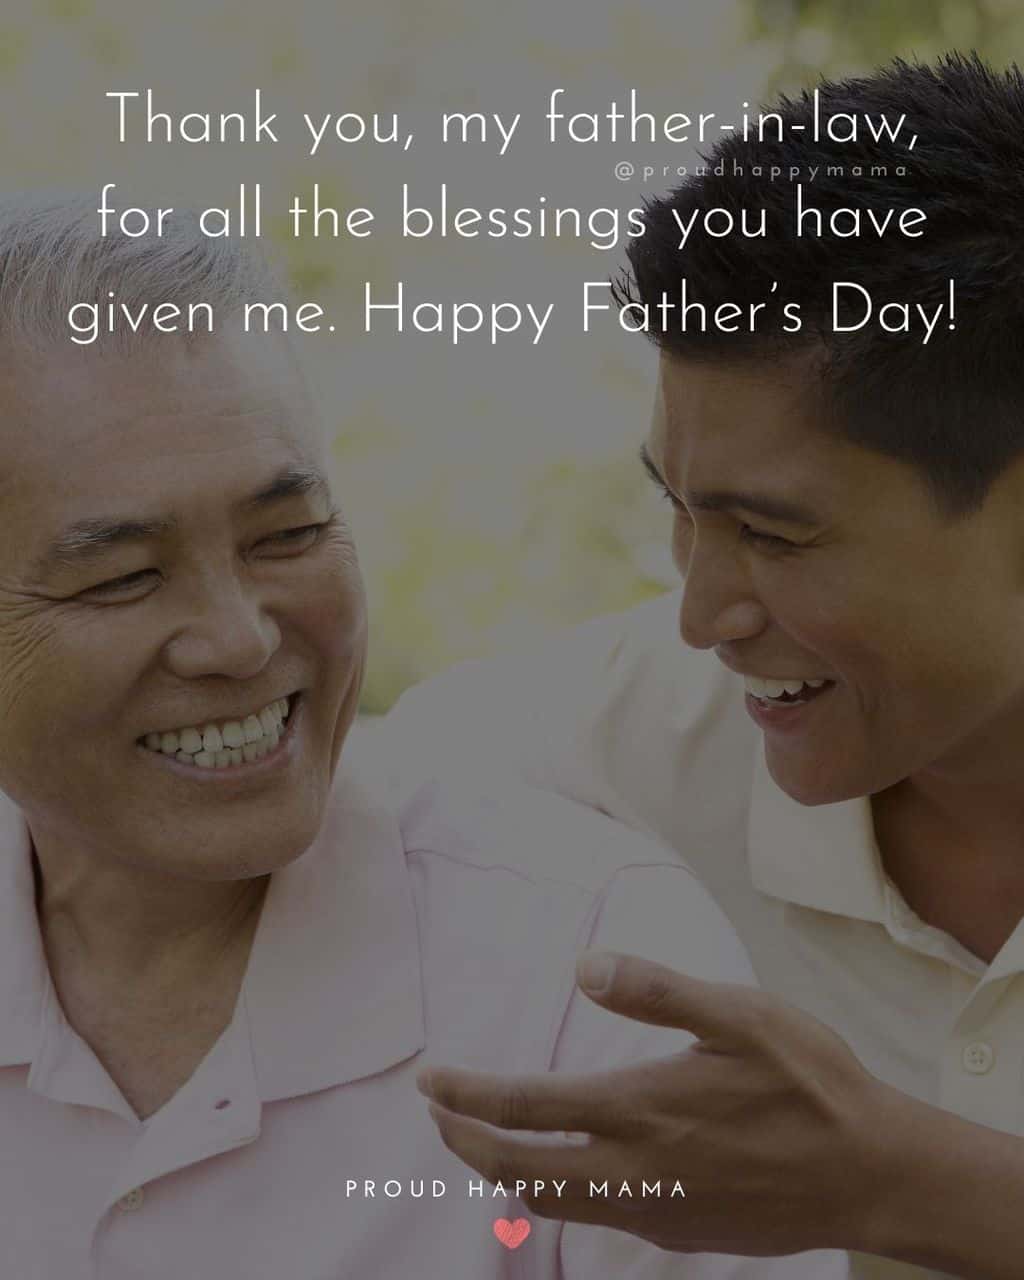 Happy Fathers Day Quotes For Father In Law - Thank you, my father in law, for all the blessings you have given me. Happy